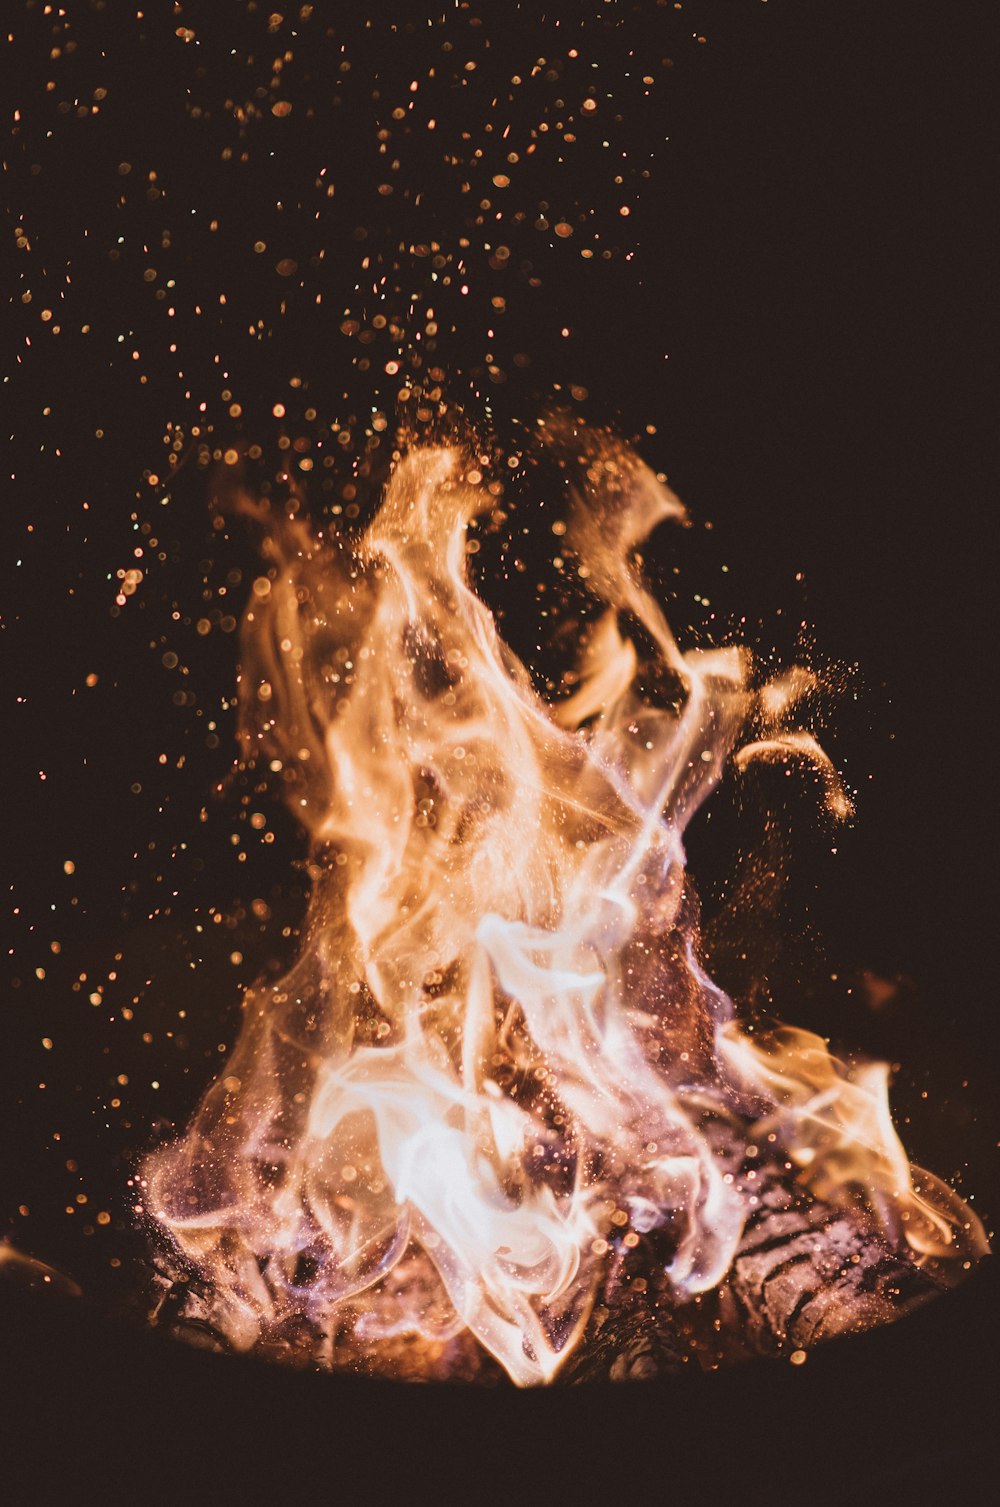 close-up photo of fire at nighttime